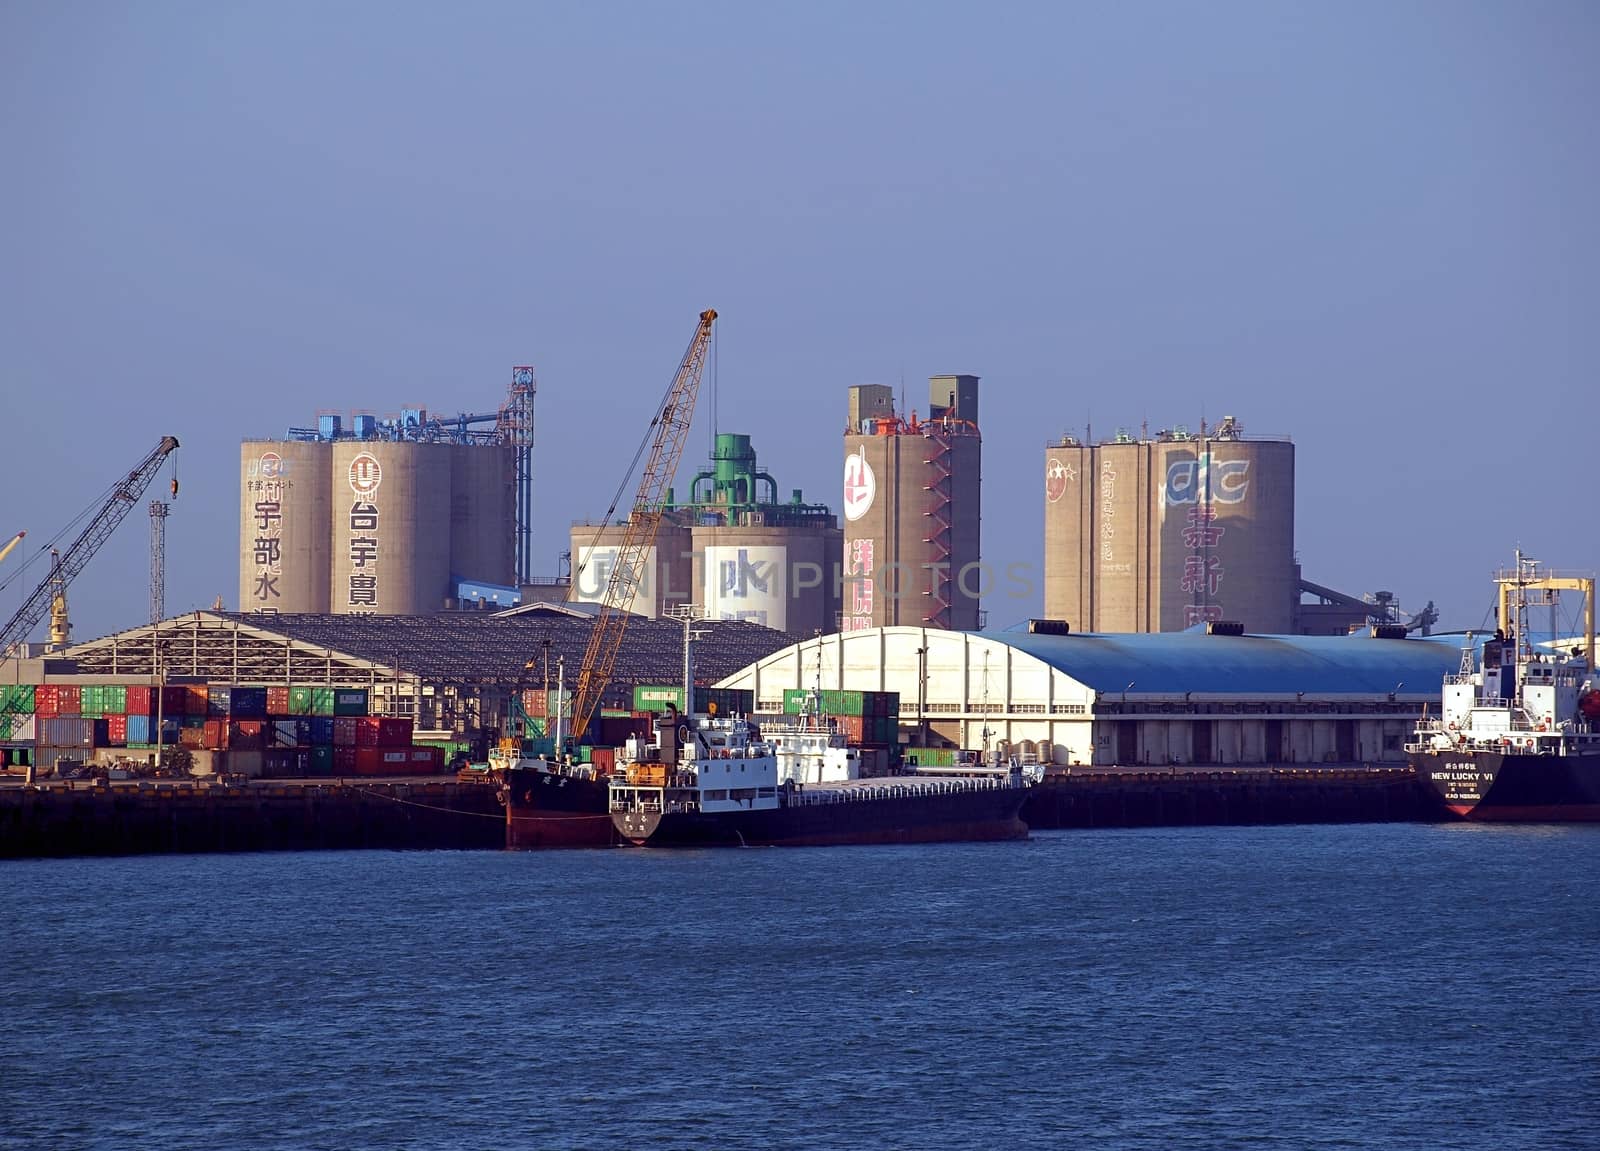 TAICHUNG, TAIWAN -- JANUARY 1, 2014: A partial view of Taichung Port, which is now the second-largest port in Taiwan after Kaohsiung Port.